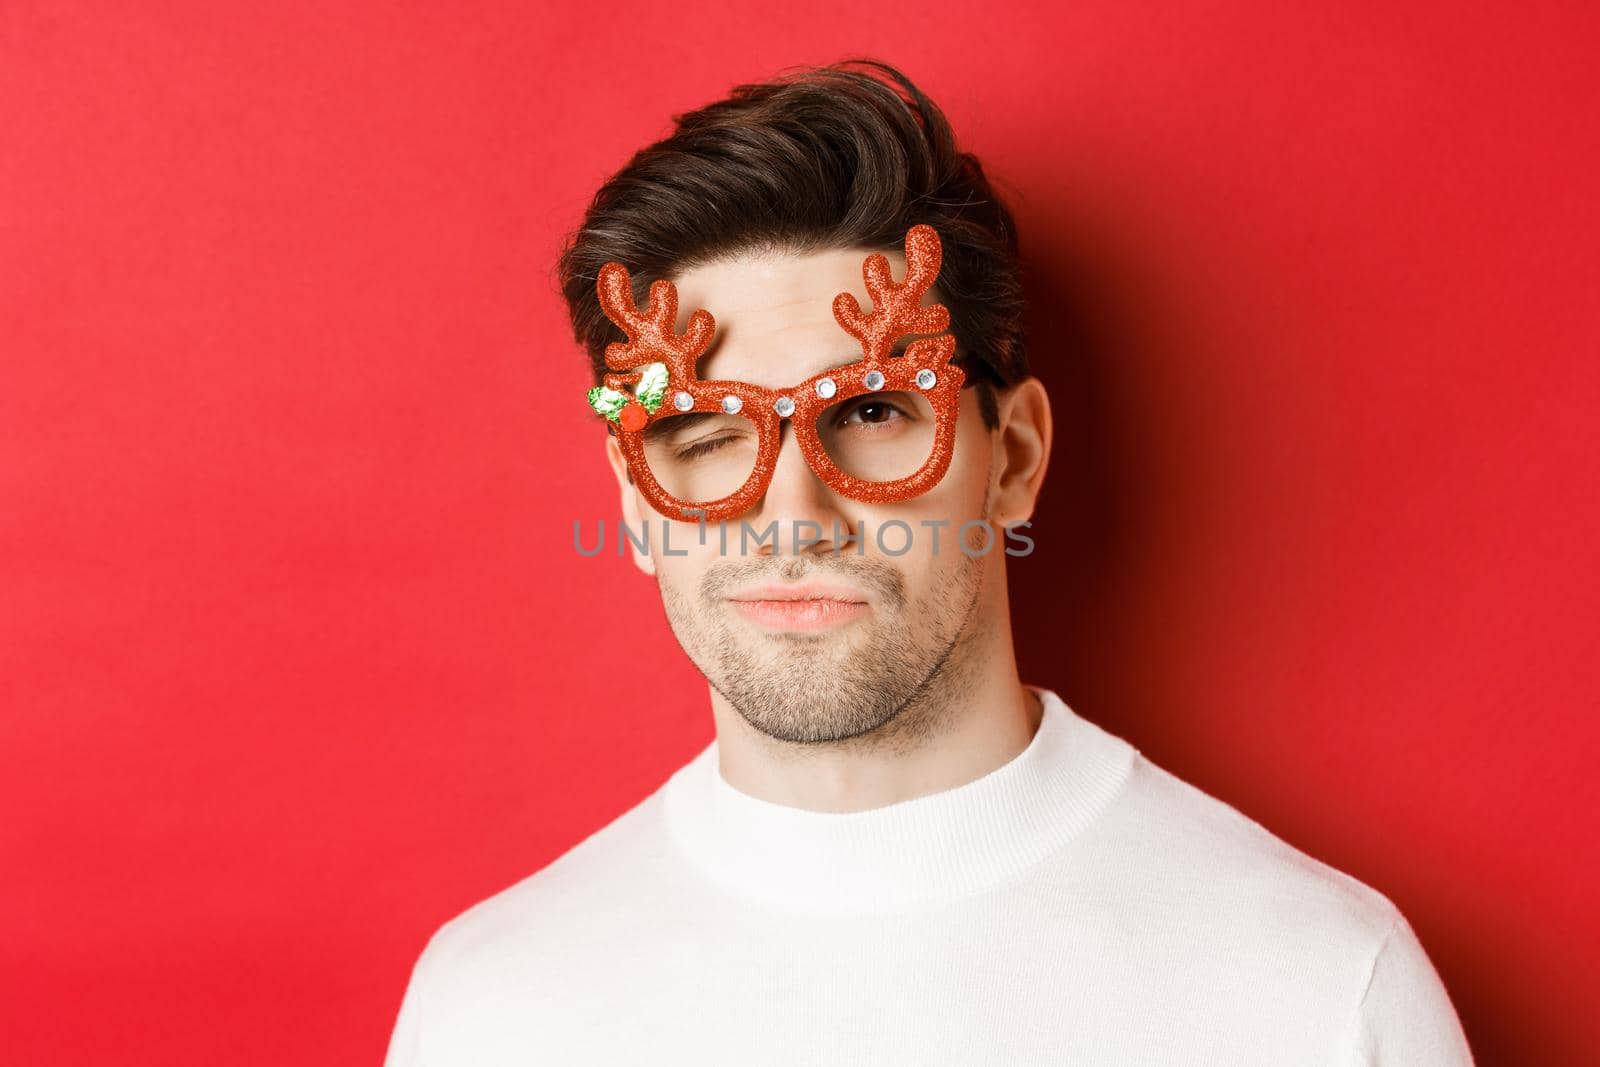 Concept of winter holidays, christmas and celebration. Close-up of cheeky attractive man in party glasses, winking and looking sassy, standing over red background.